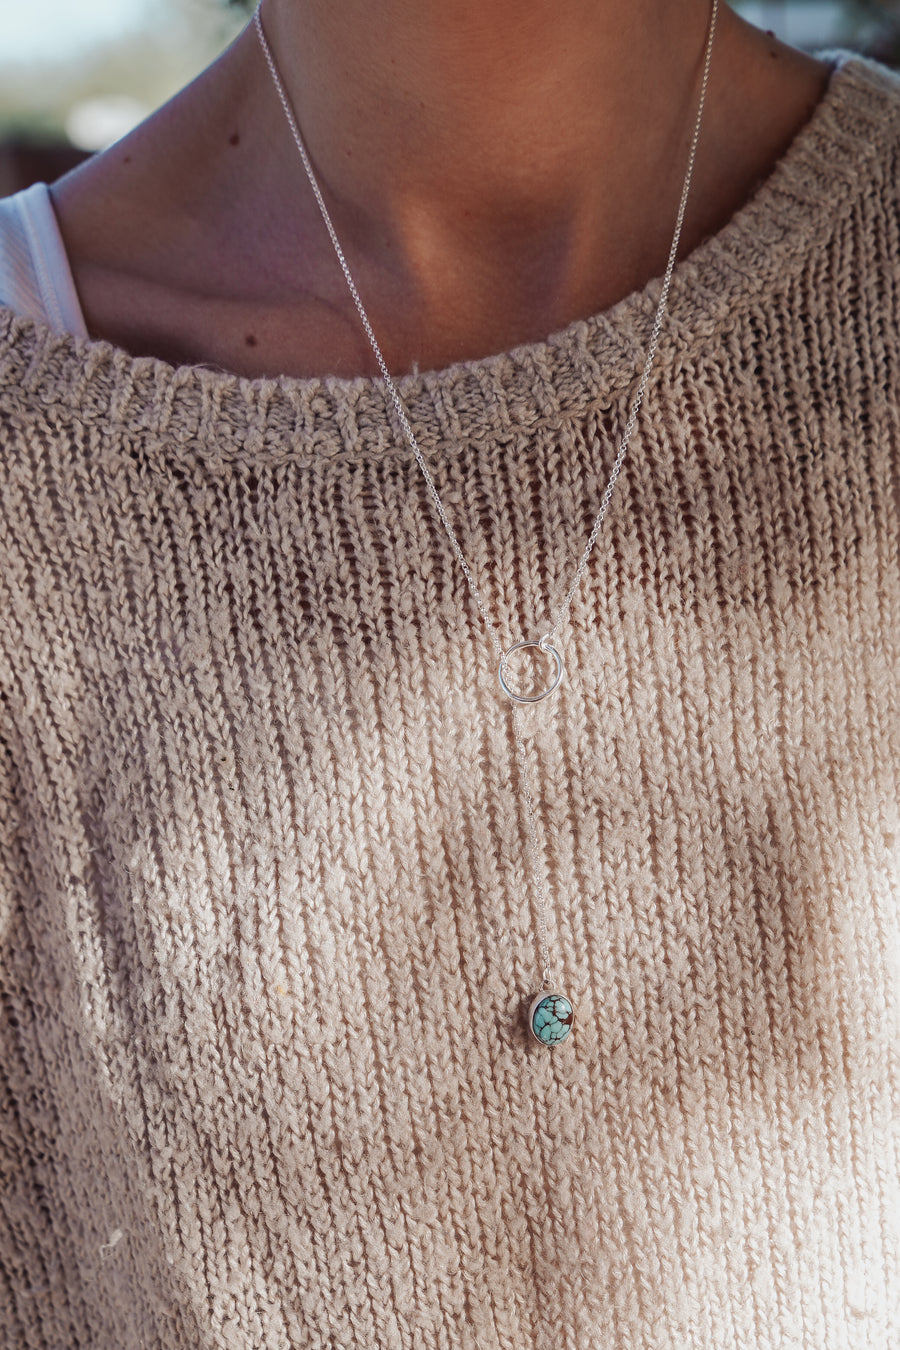 Dainty Lariat in Egyptian Turquoise